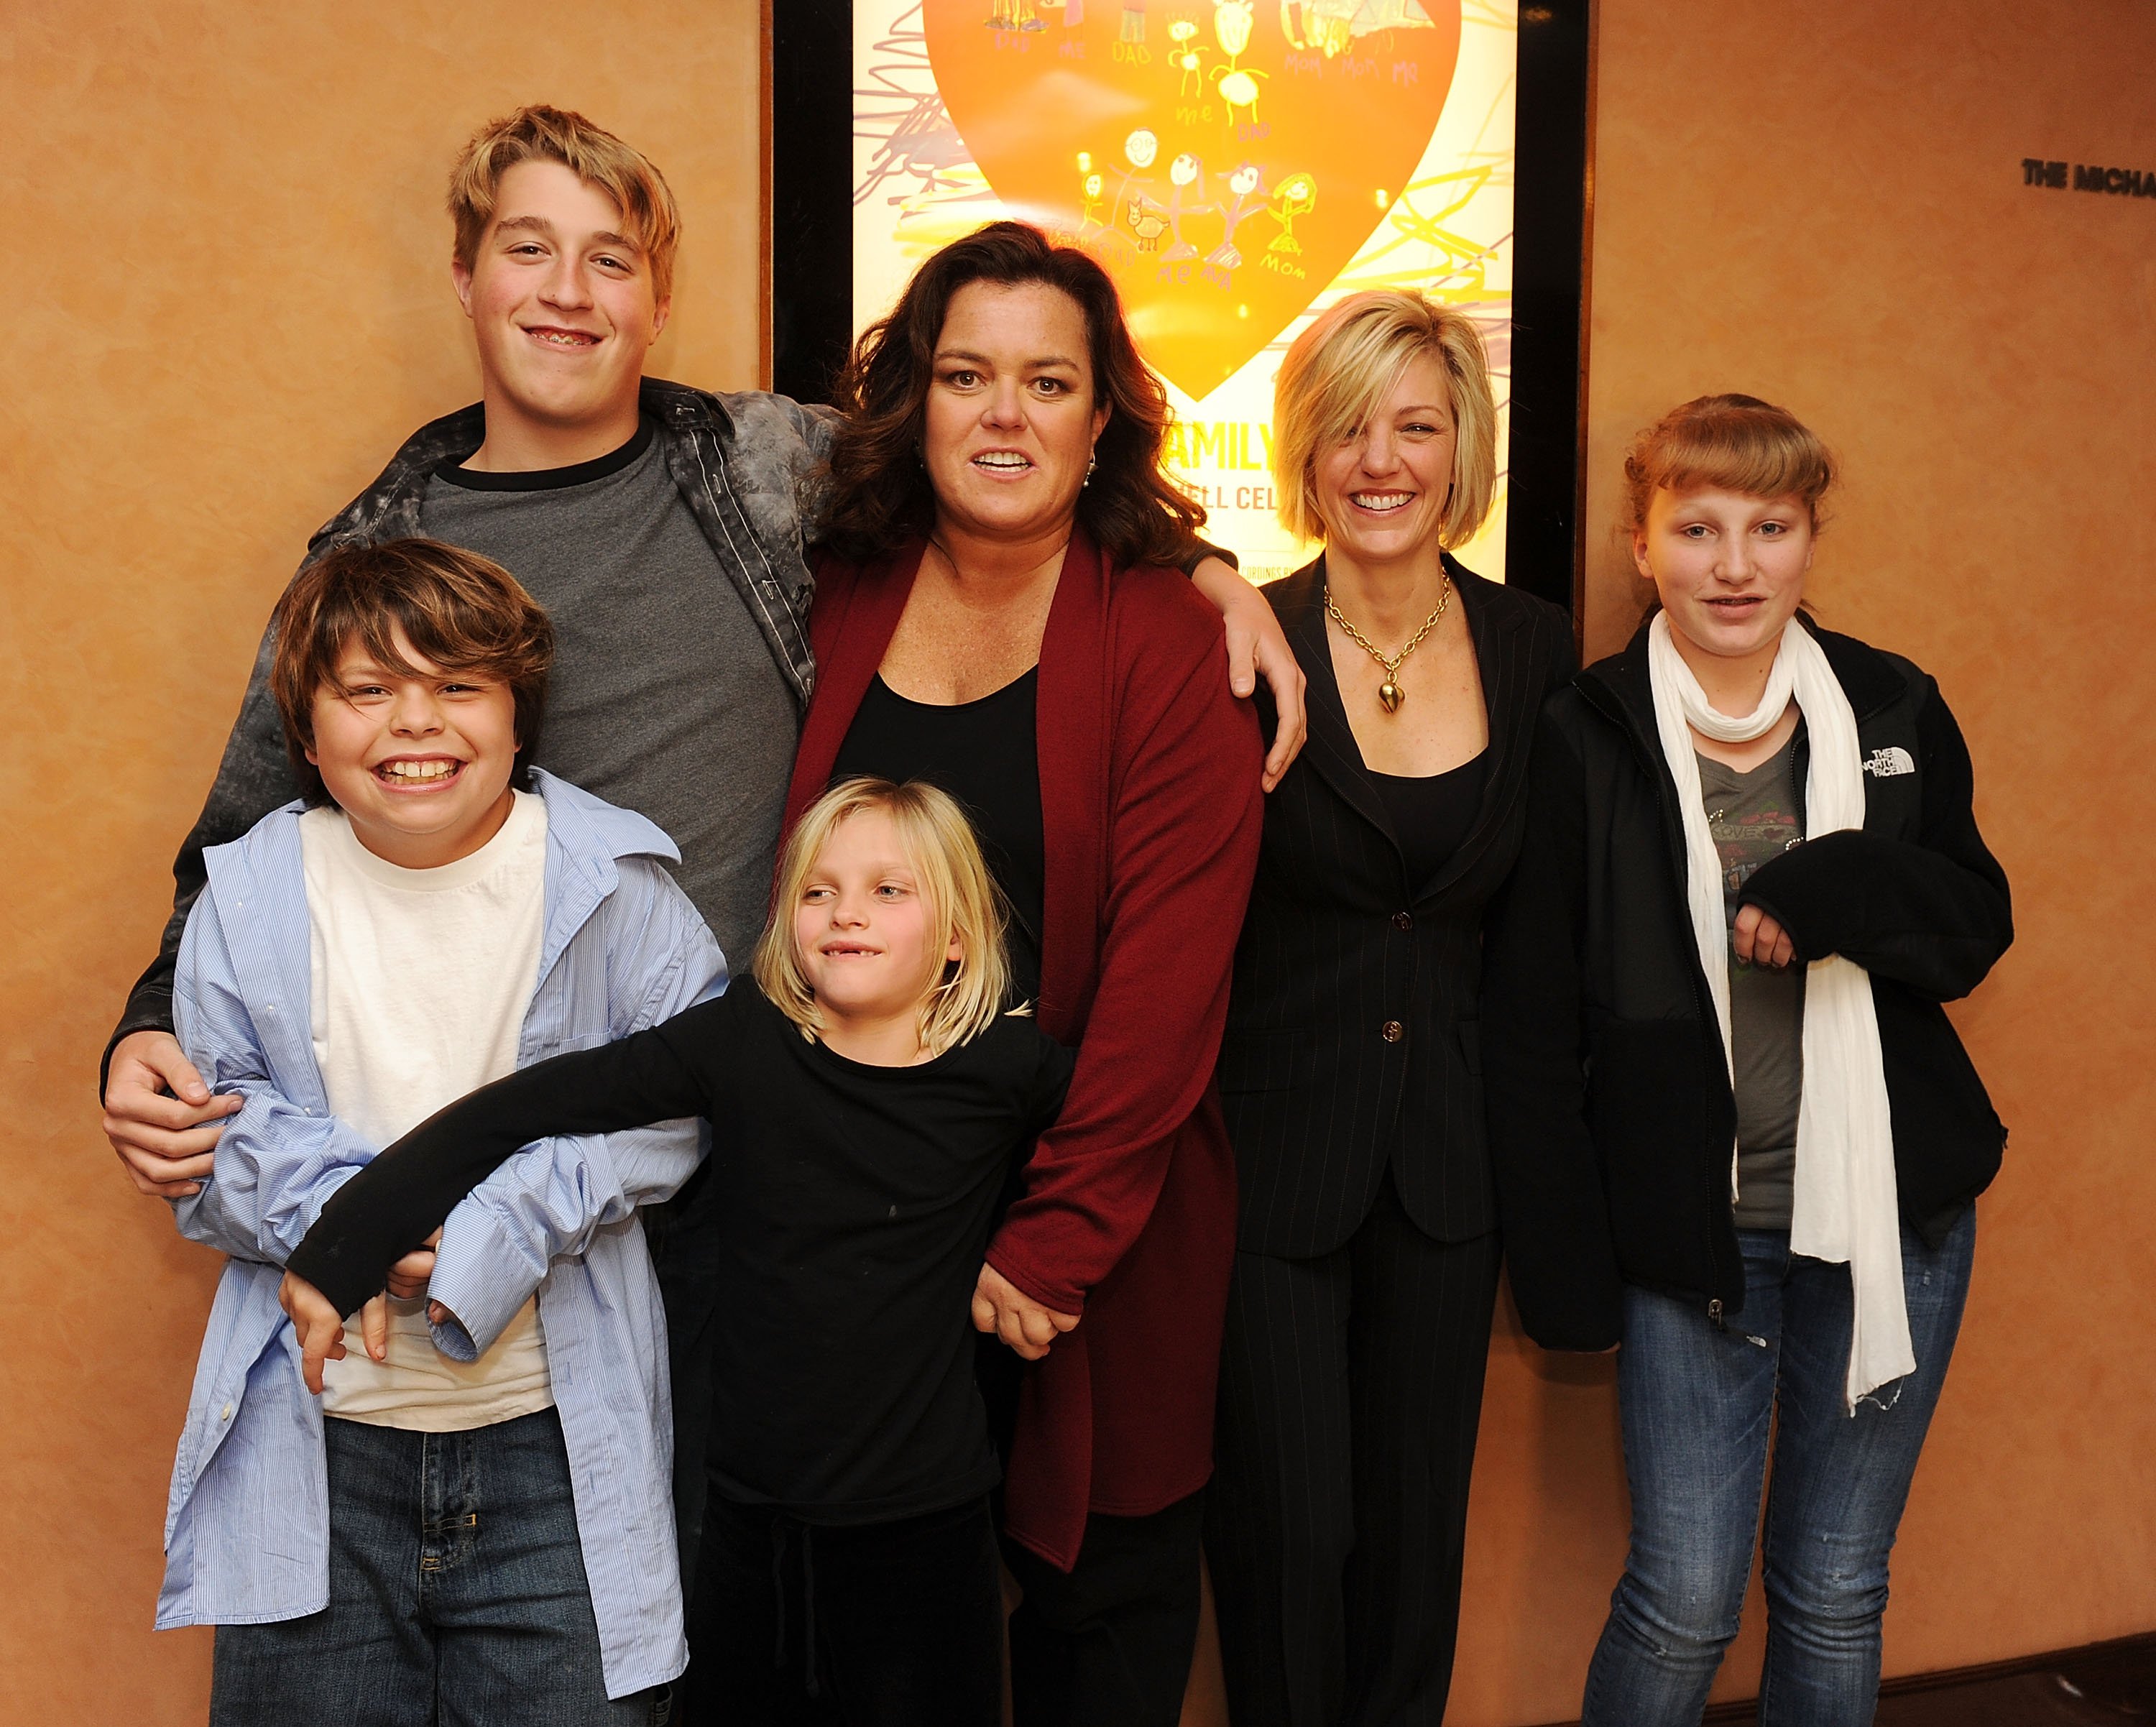 Pictured: Blake O'Donnell, Parker O'Donnell, Vivi O'Donnell, executive producer Rosie O'Donnell, Kelli O'Donnell, and Chelsea O'Donnell attend the HBO documentary screening of "A Family is a Family: A Rosie O'Donnell Celebration" at the HBO Theater on January 19, 2010 in New York City | Photo: Getty Images